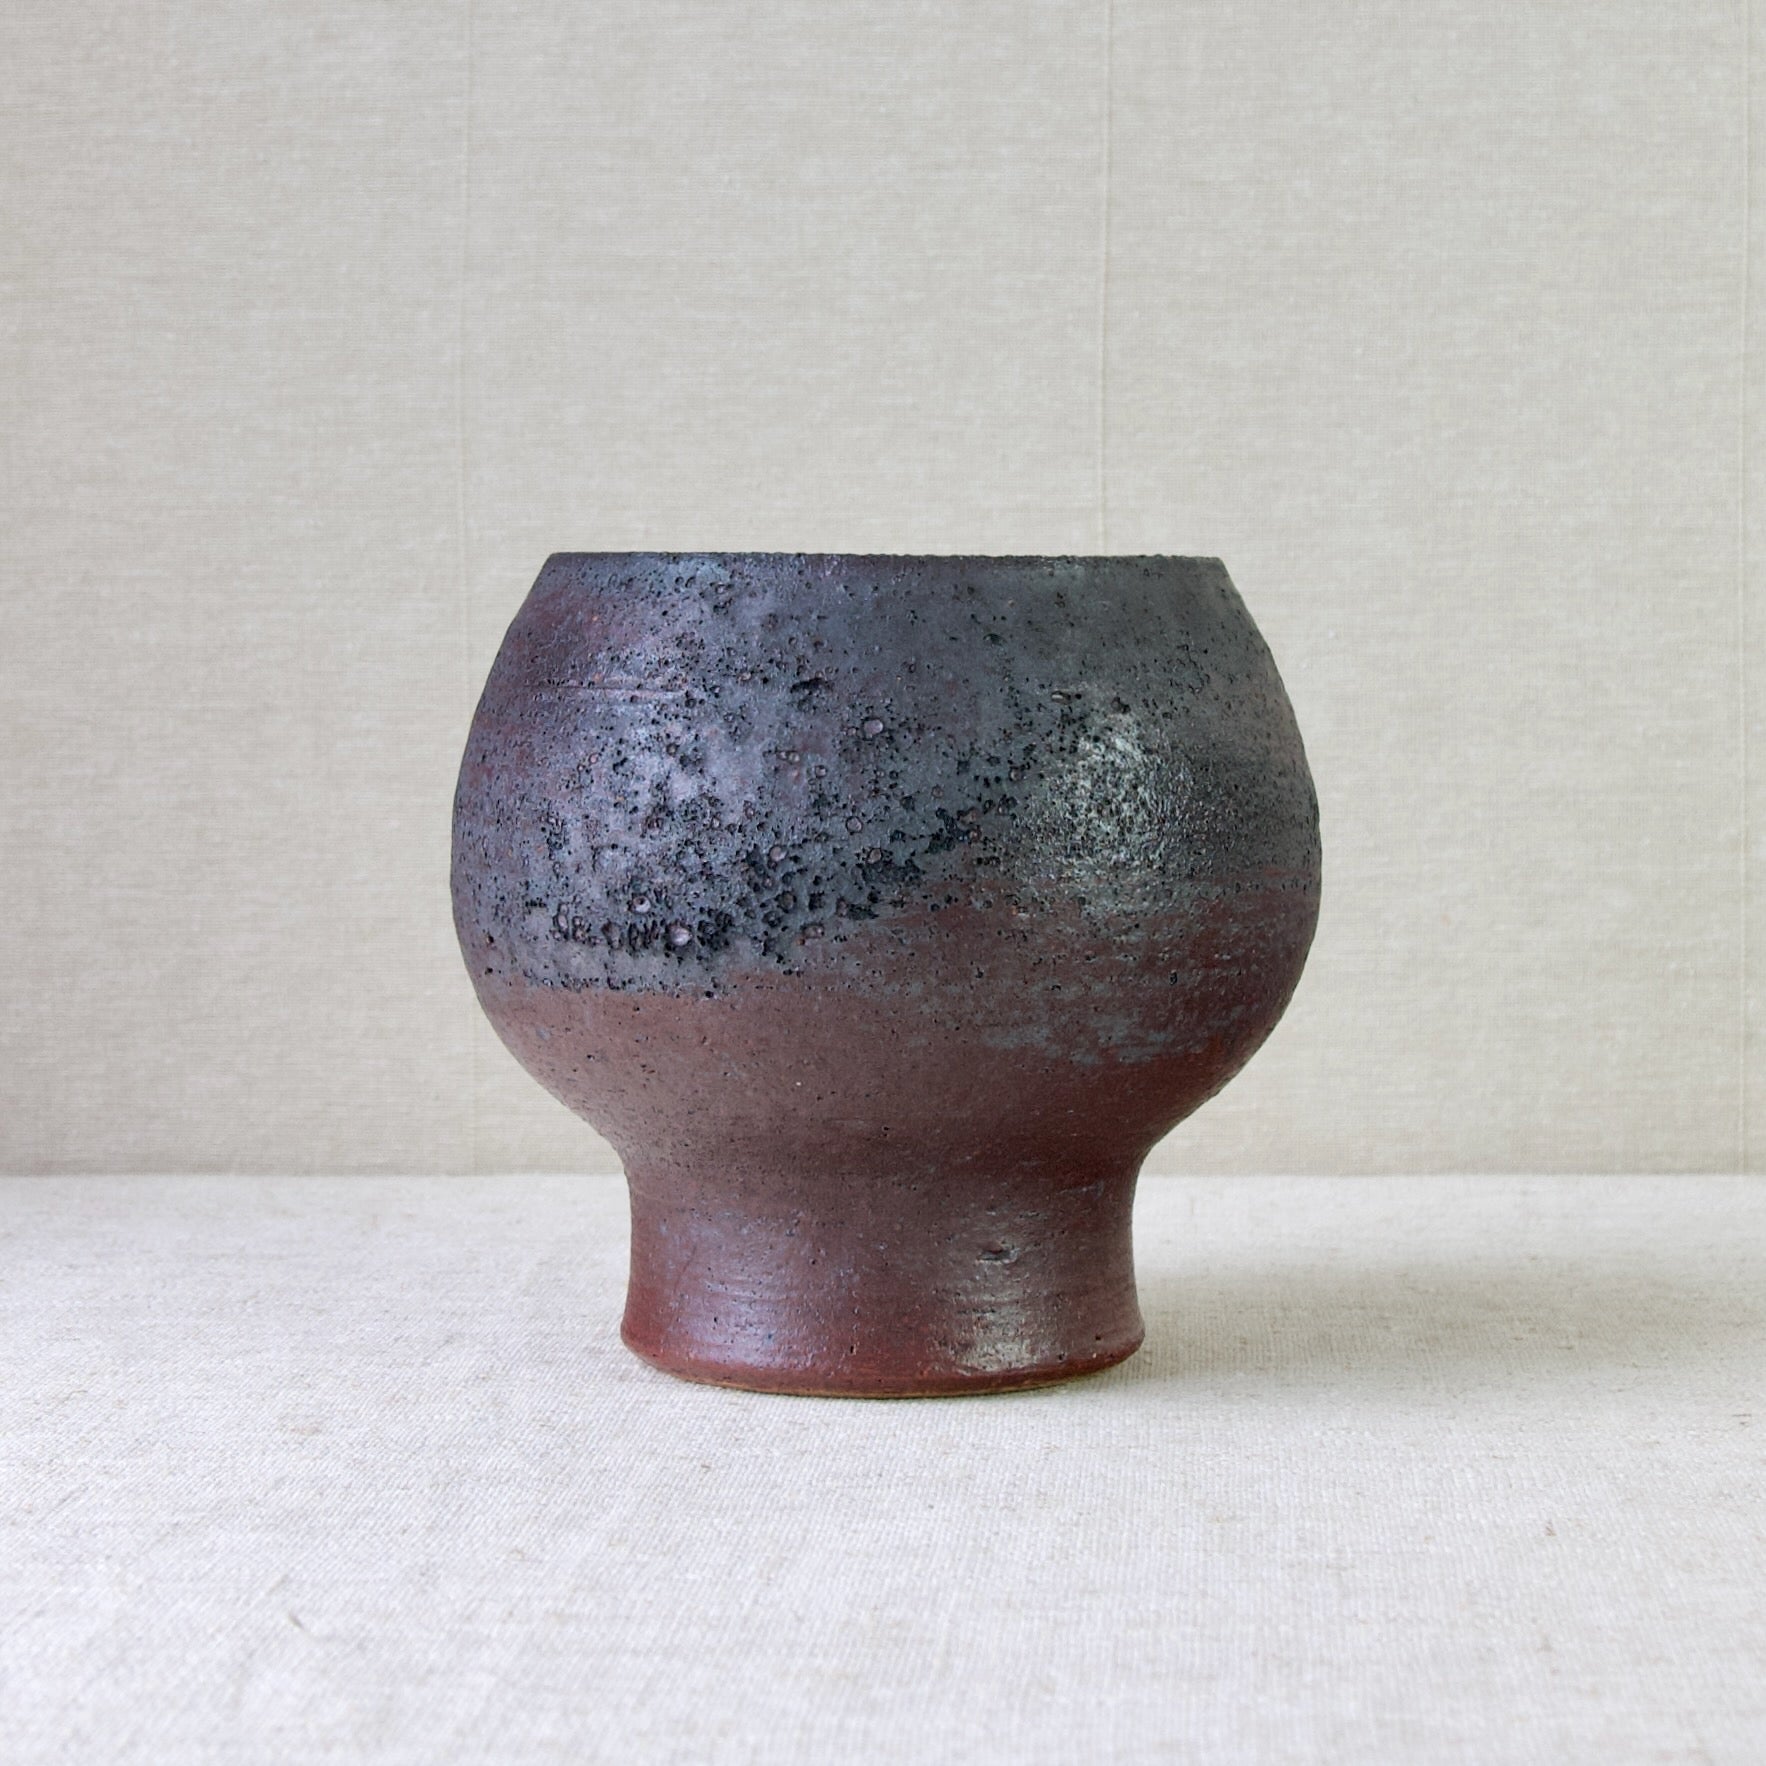 Liisa Hallamaa Arabia studio vase with Chamotte clay. An organic, natural aesthetic with highly textured organic surface.